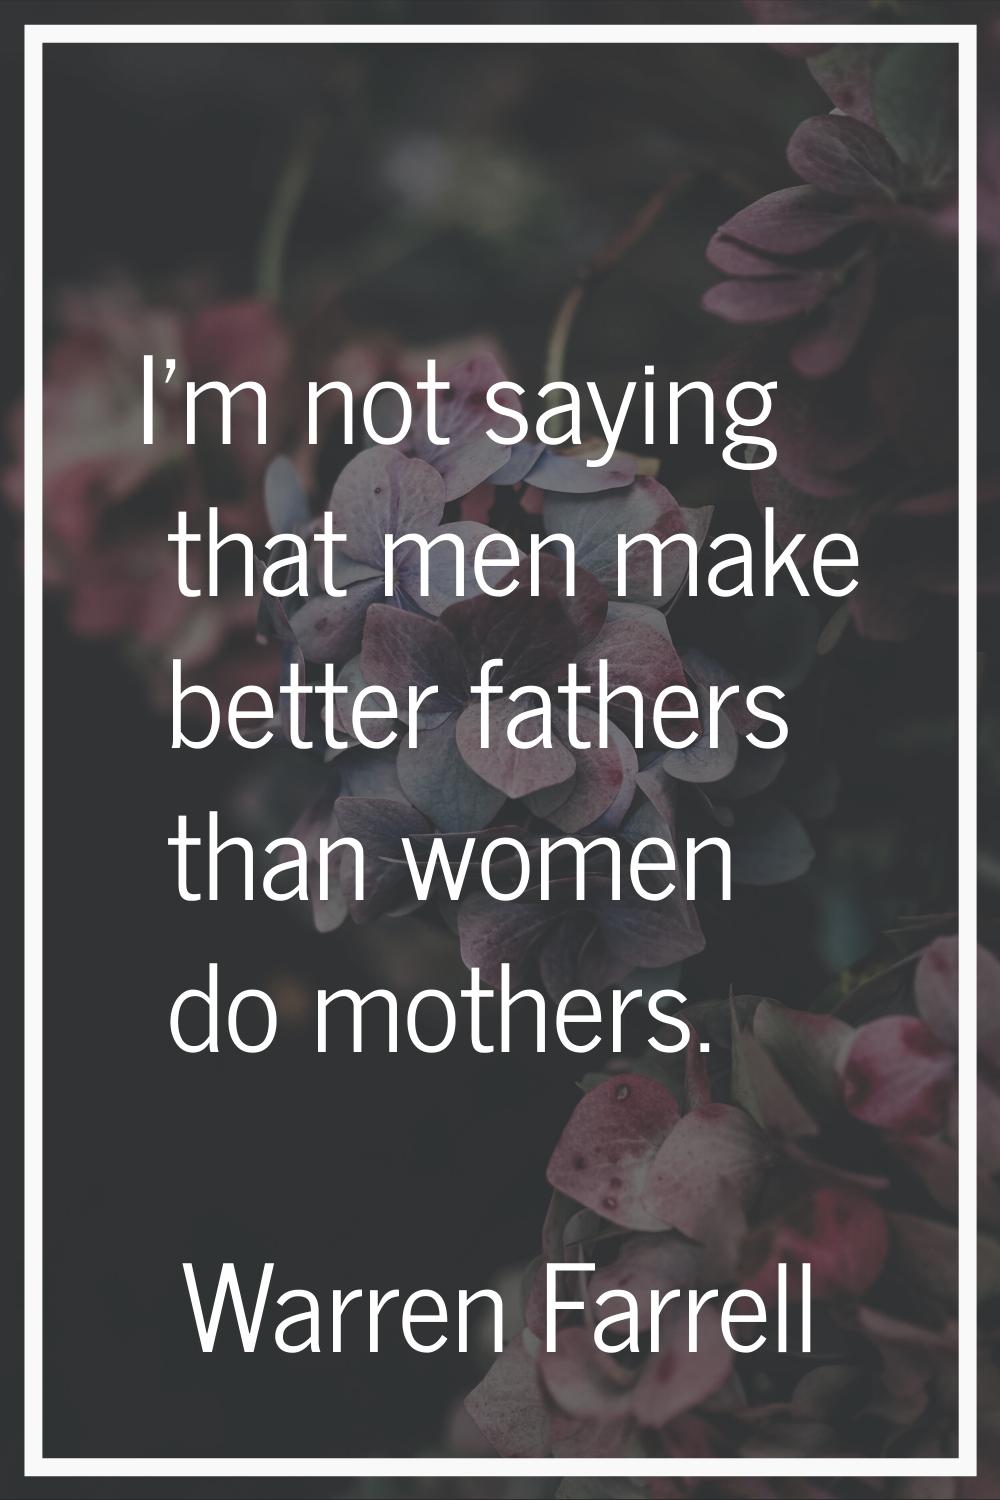 I'm not saying that men make better fathers than women do mothers.